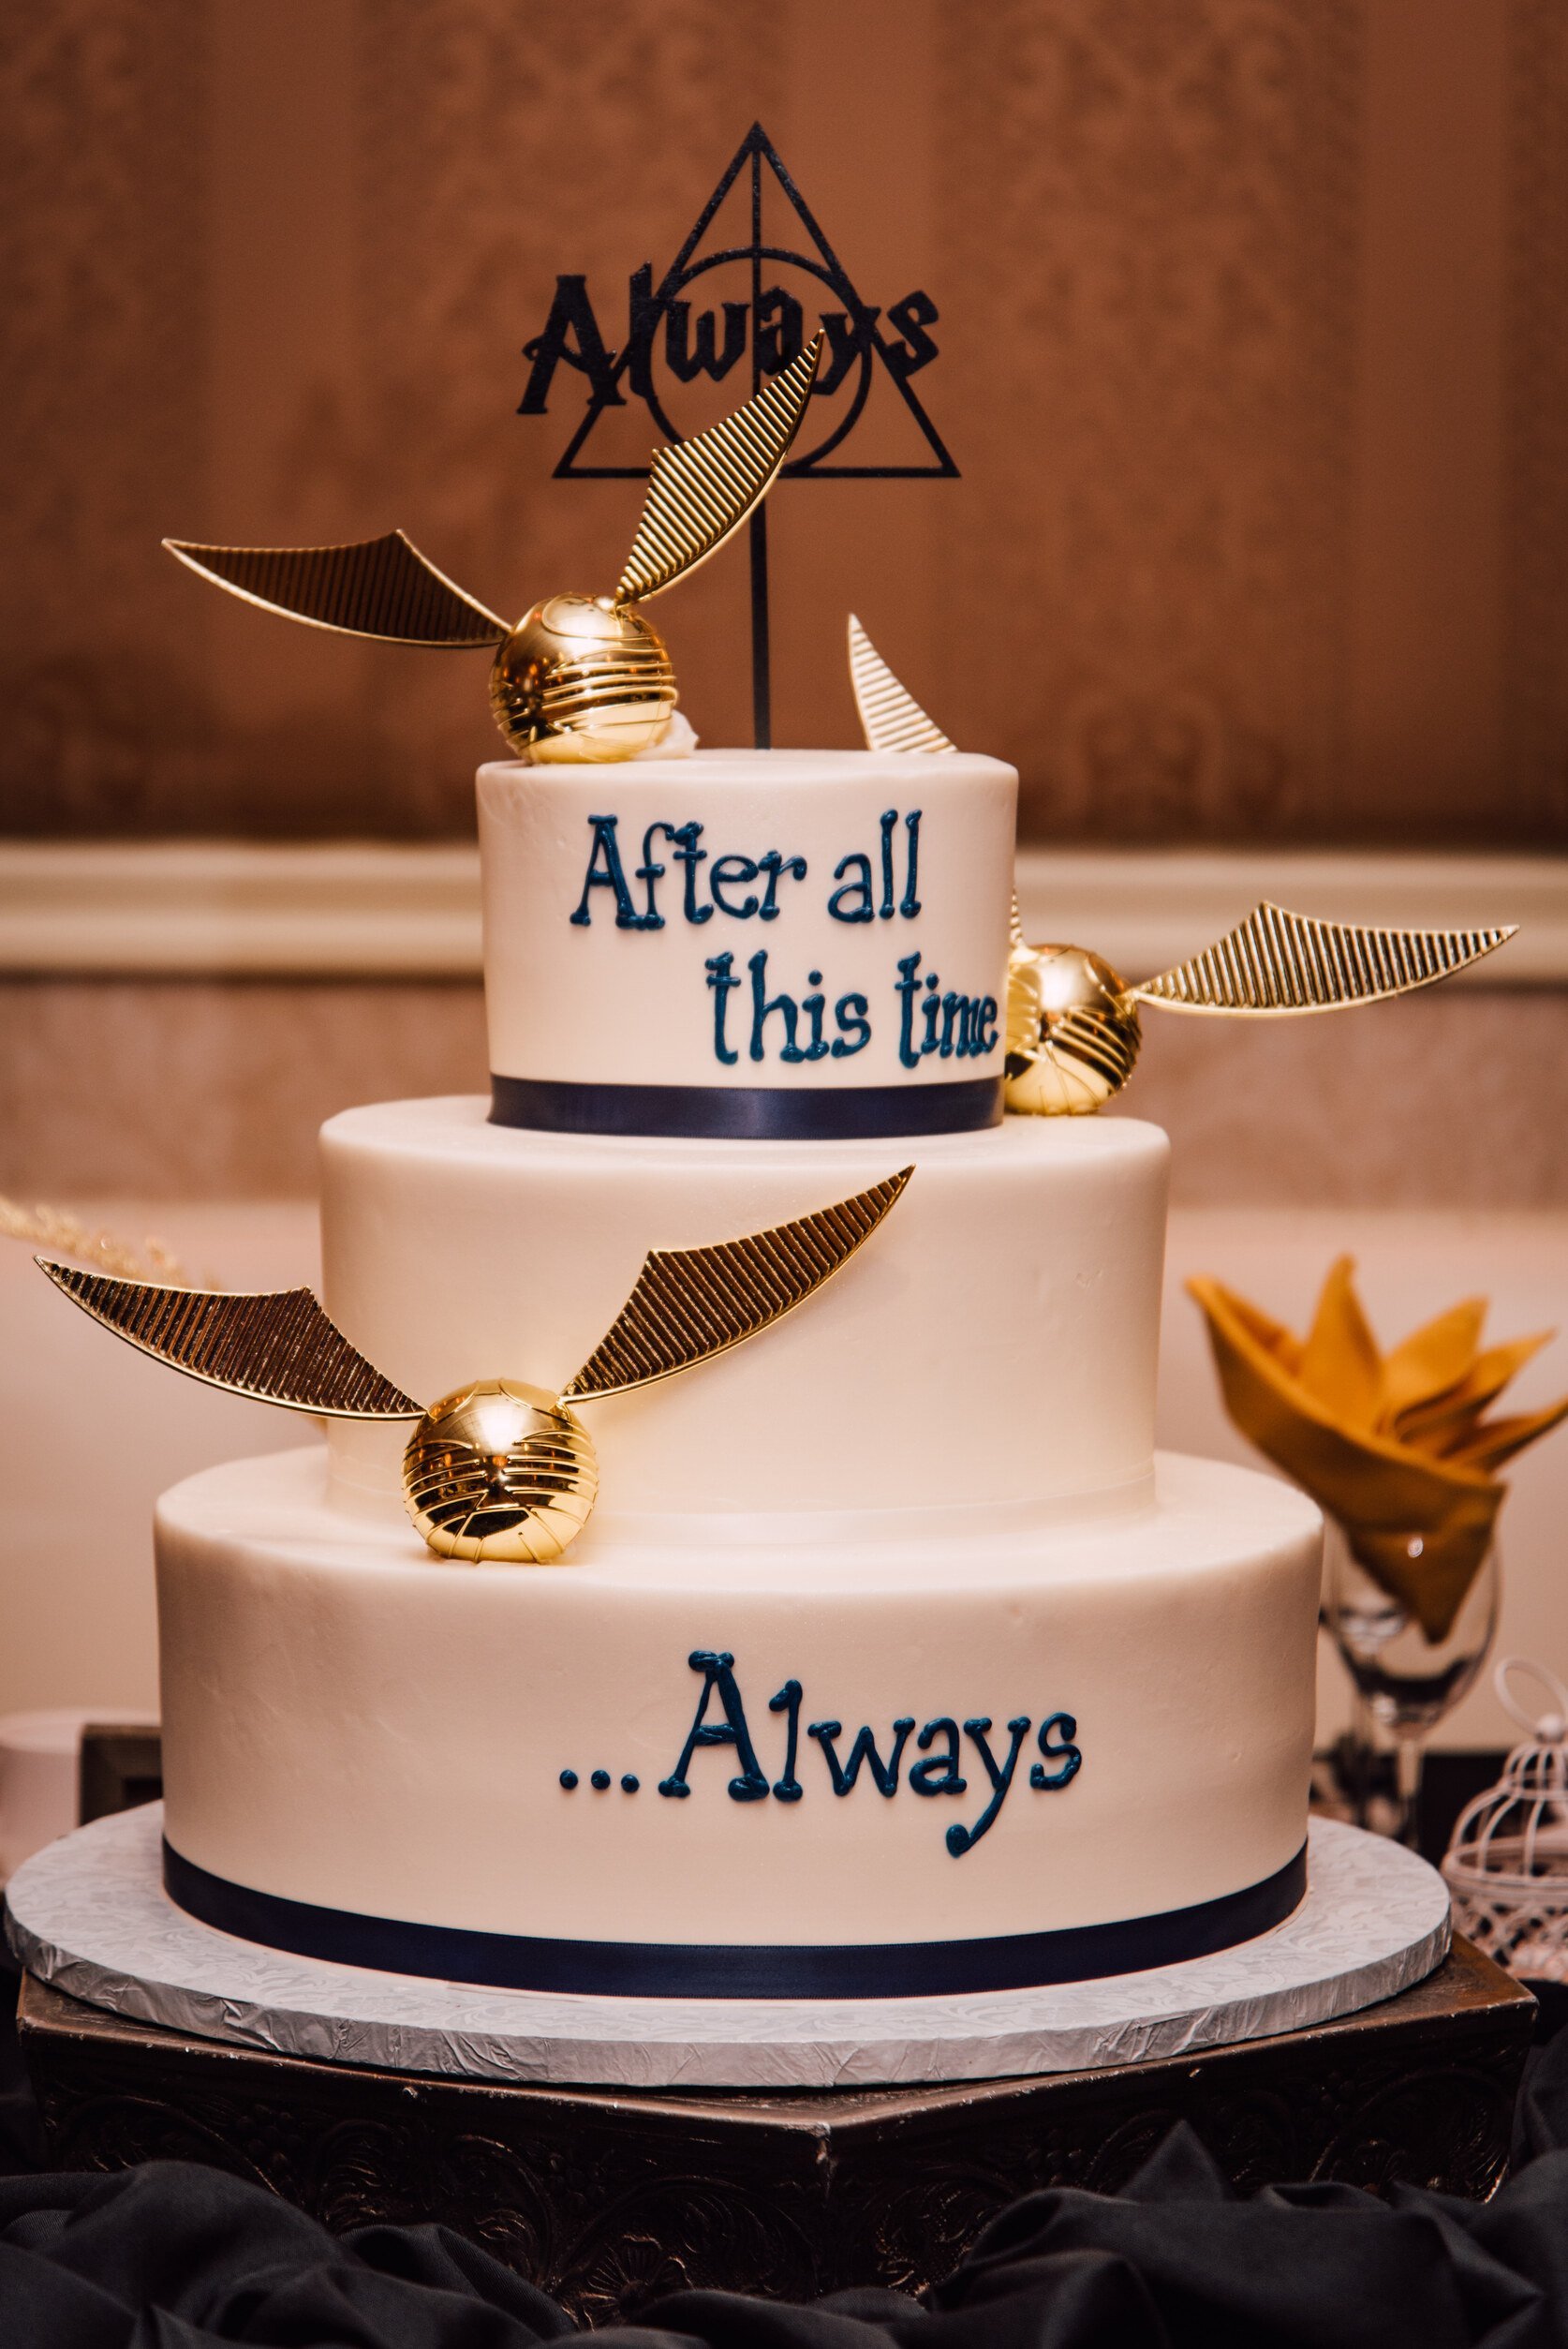  a harry potter wedding cake sits on a table decked out with the always symbol and quidditch snitch with the quote “after all this time… always” piped on the side of the 3 layer cake 